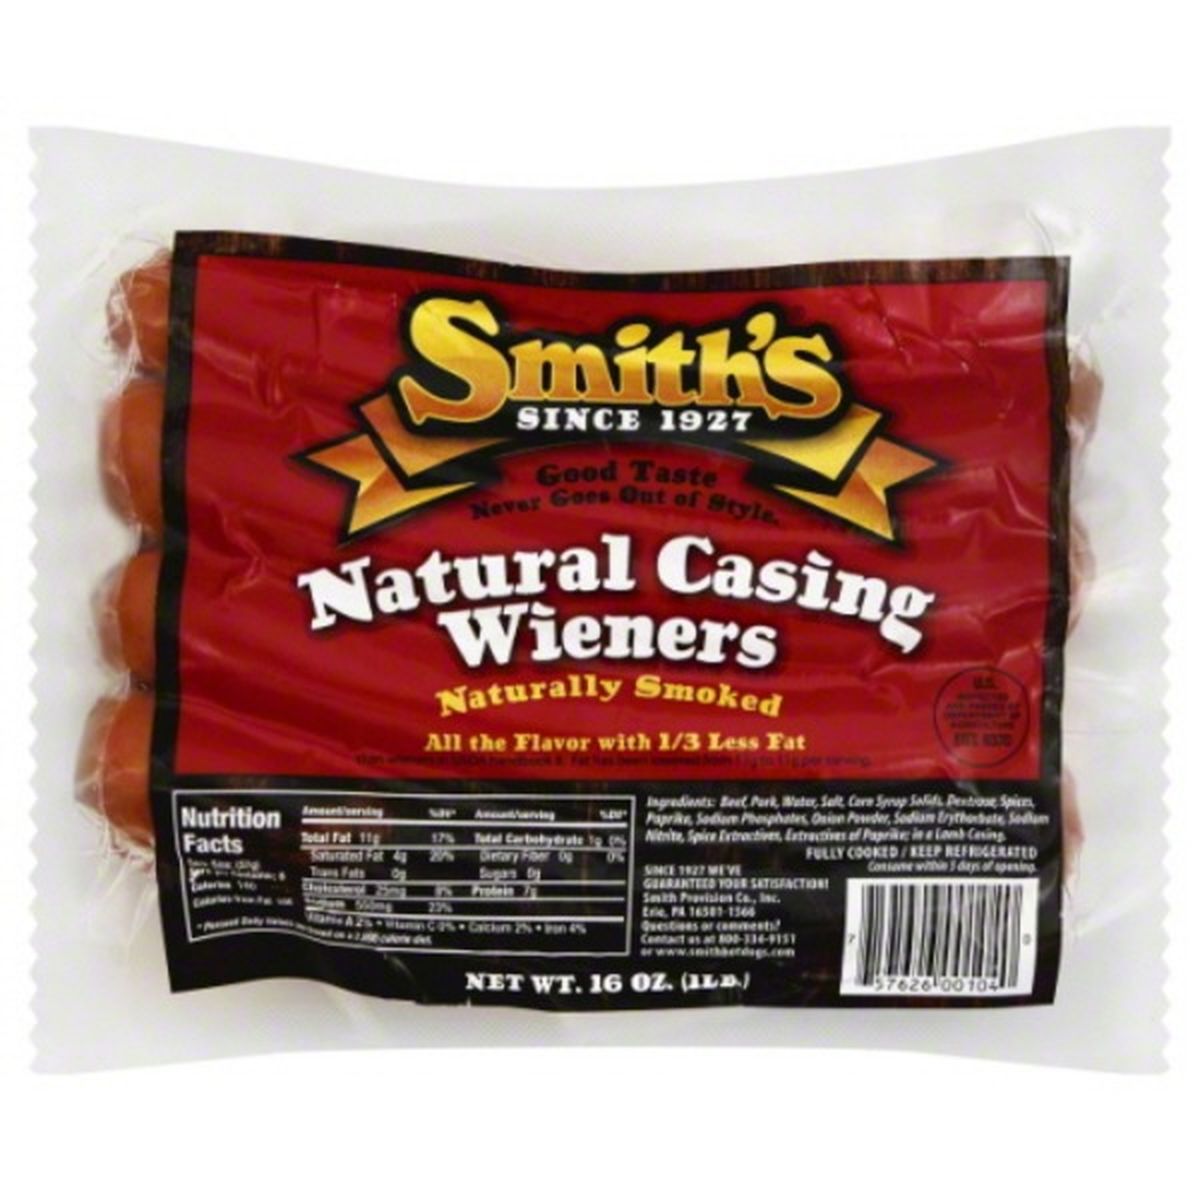 Calories in Smiths Wieners, Natural Casing